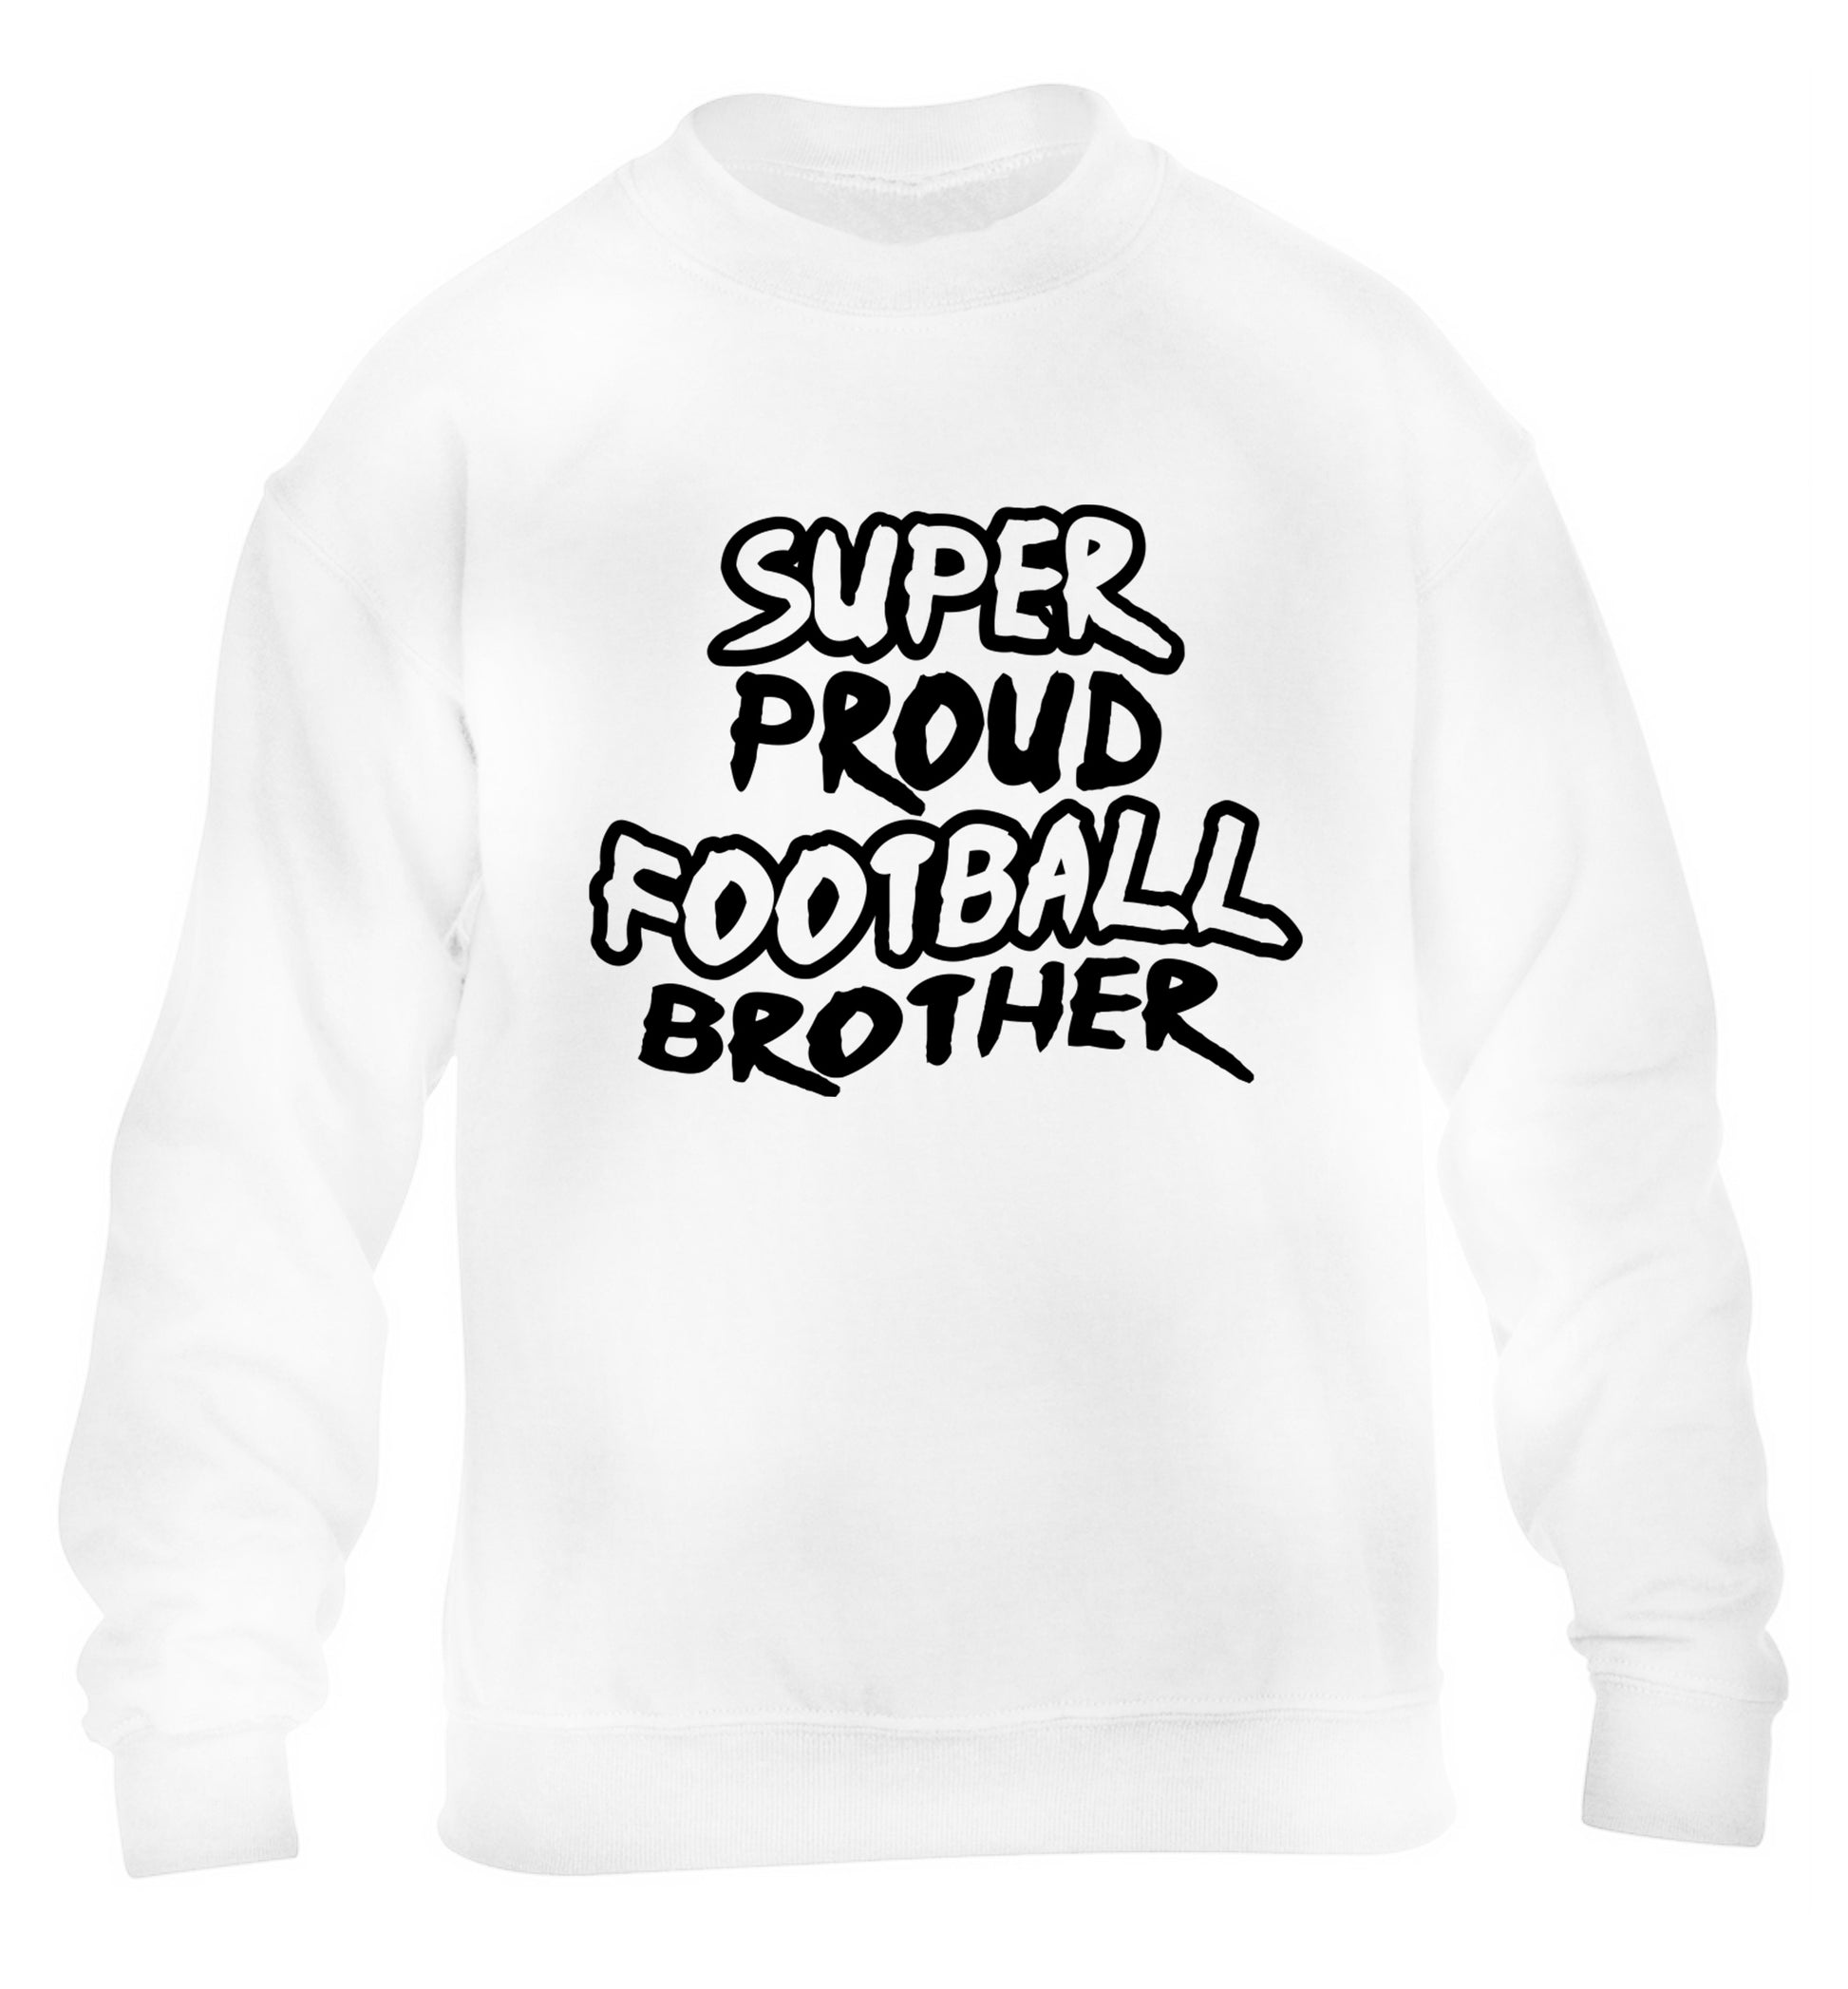 Super proud football brother children's white sweater 12-14 Years